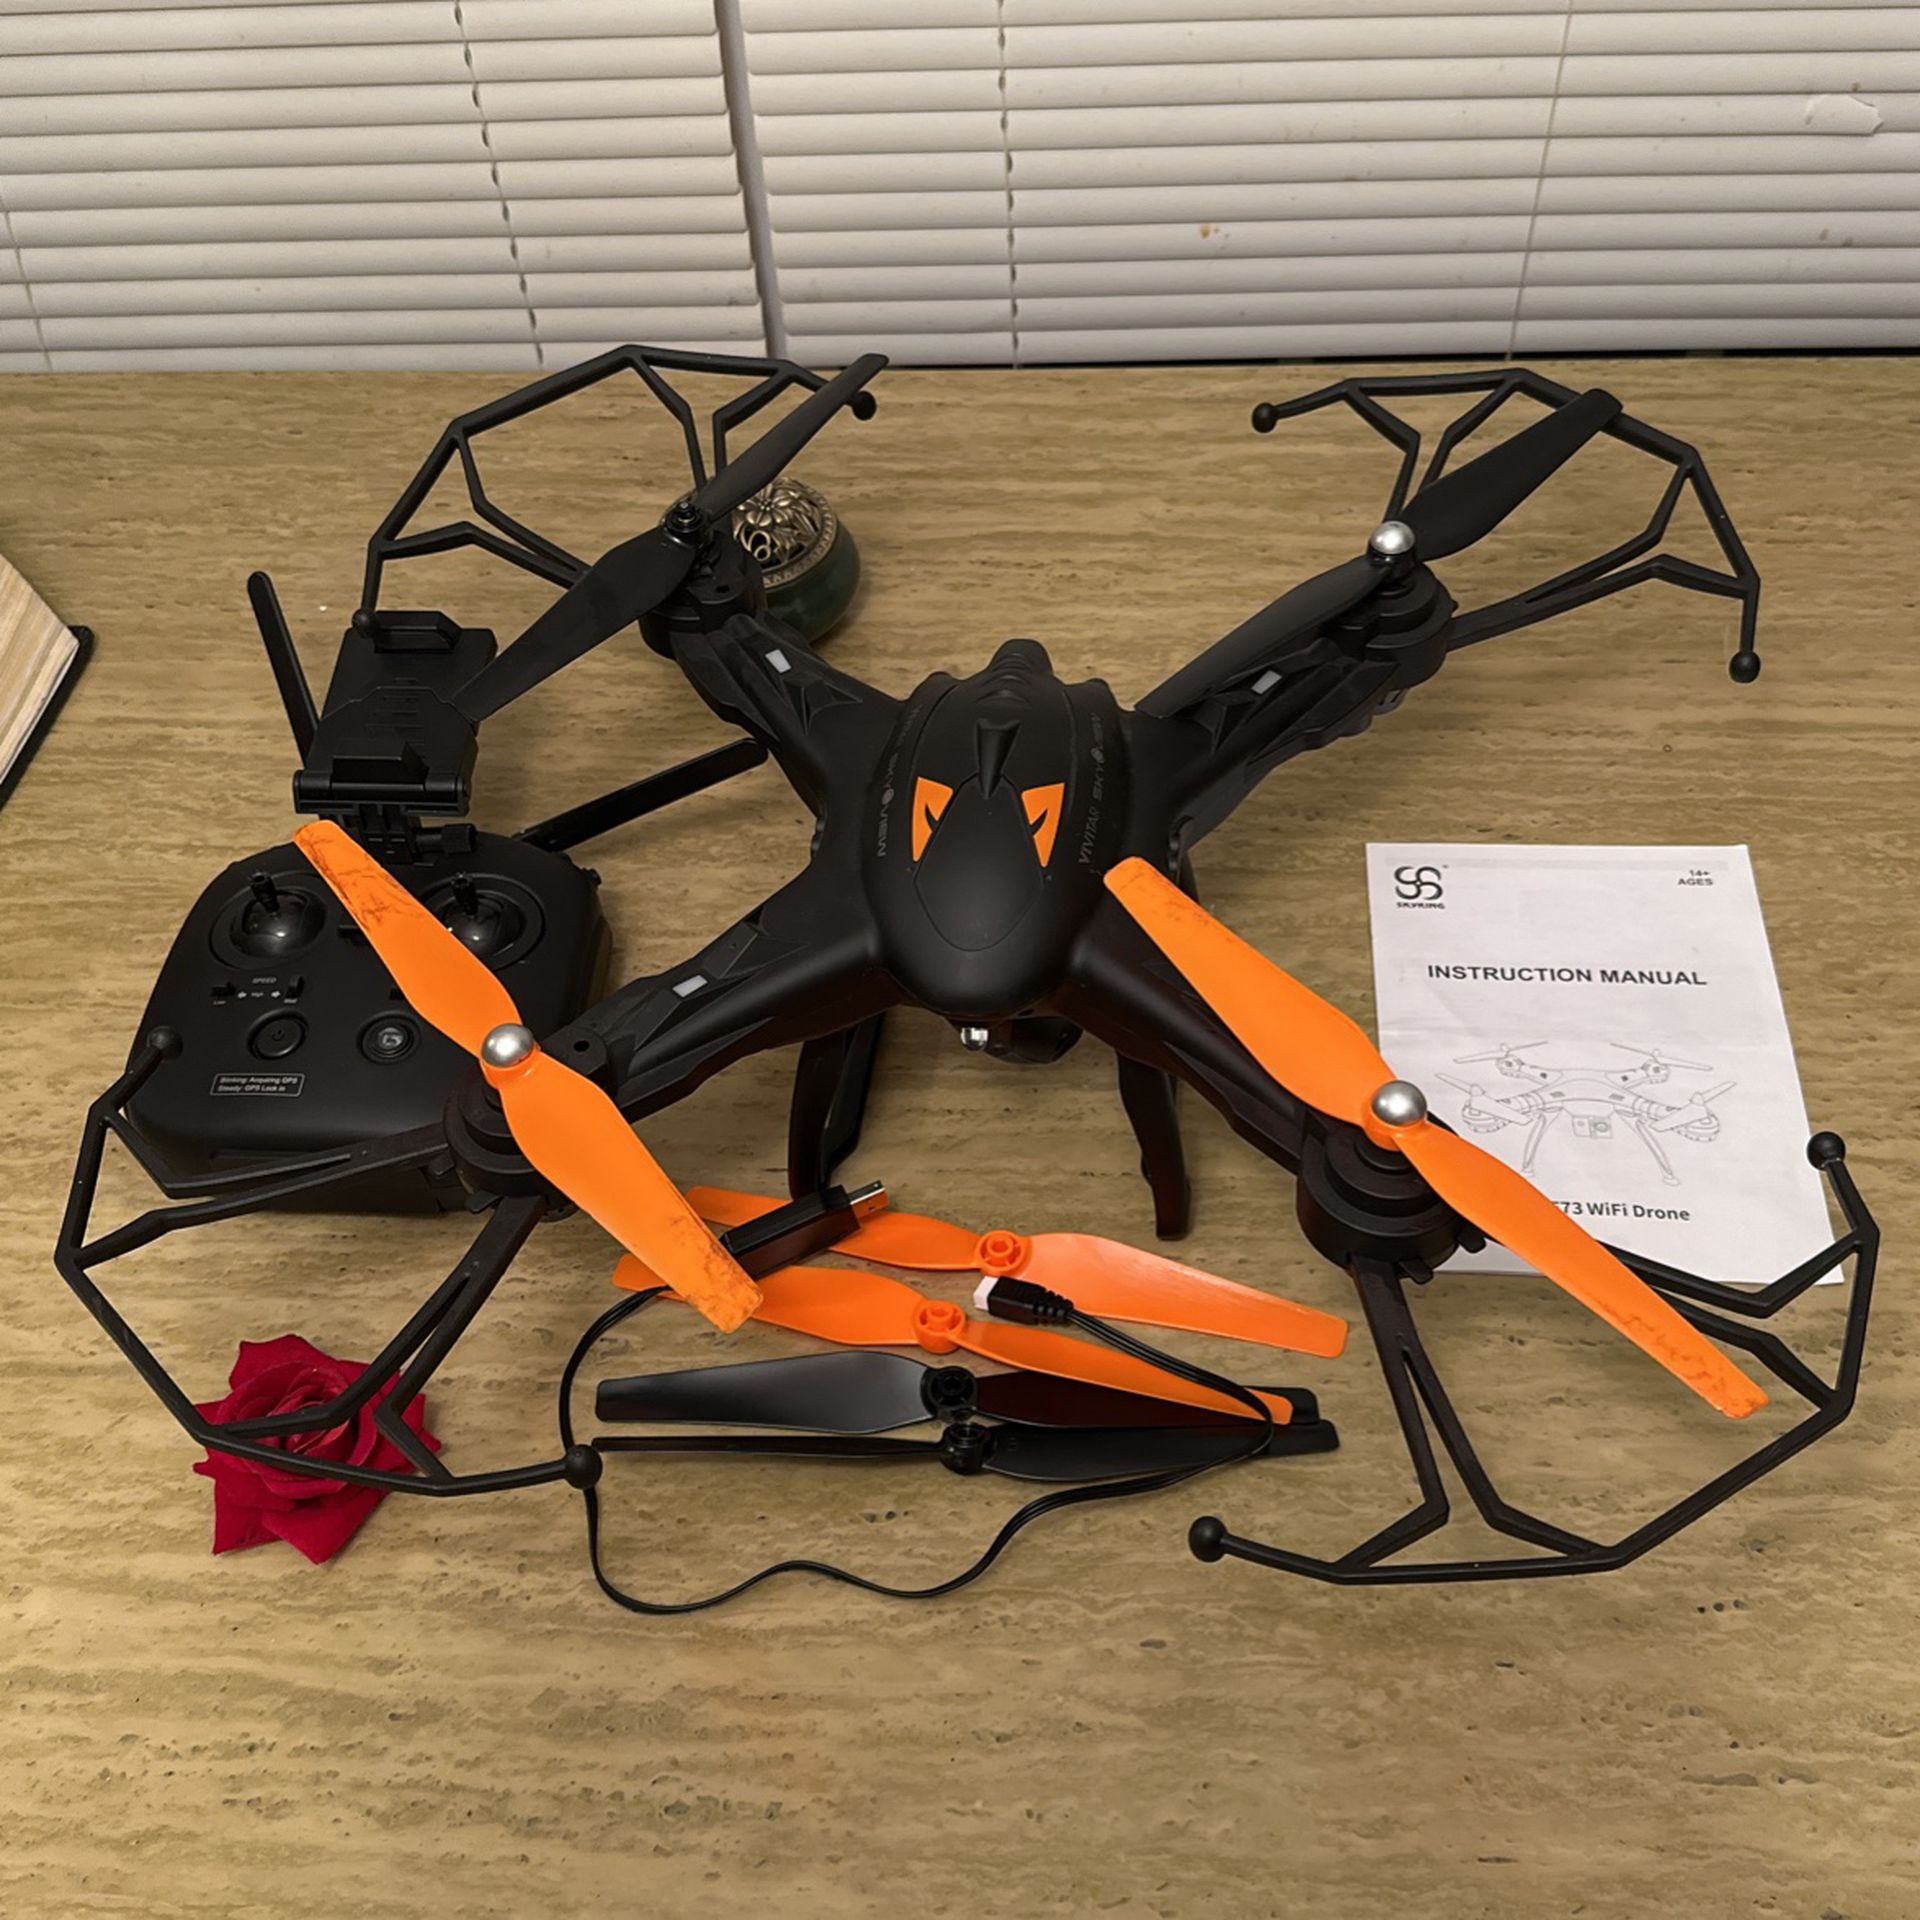 Sky King Drone for Sale in Charlotte, NC -